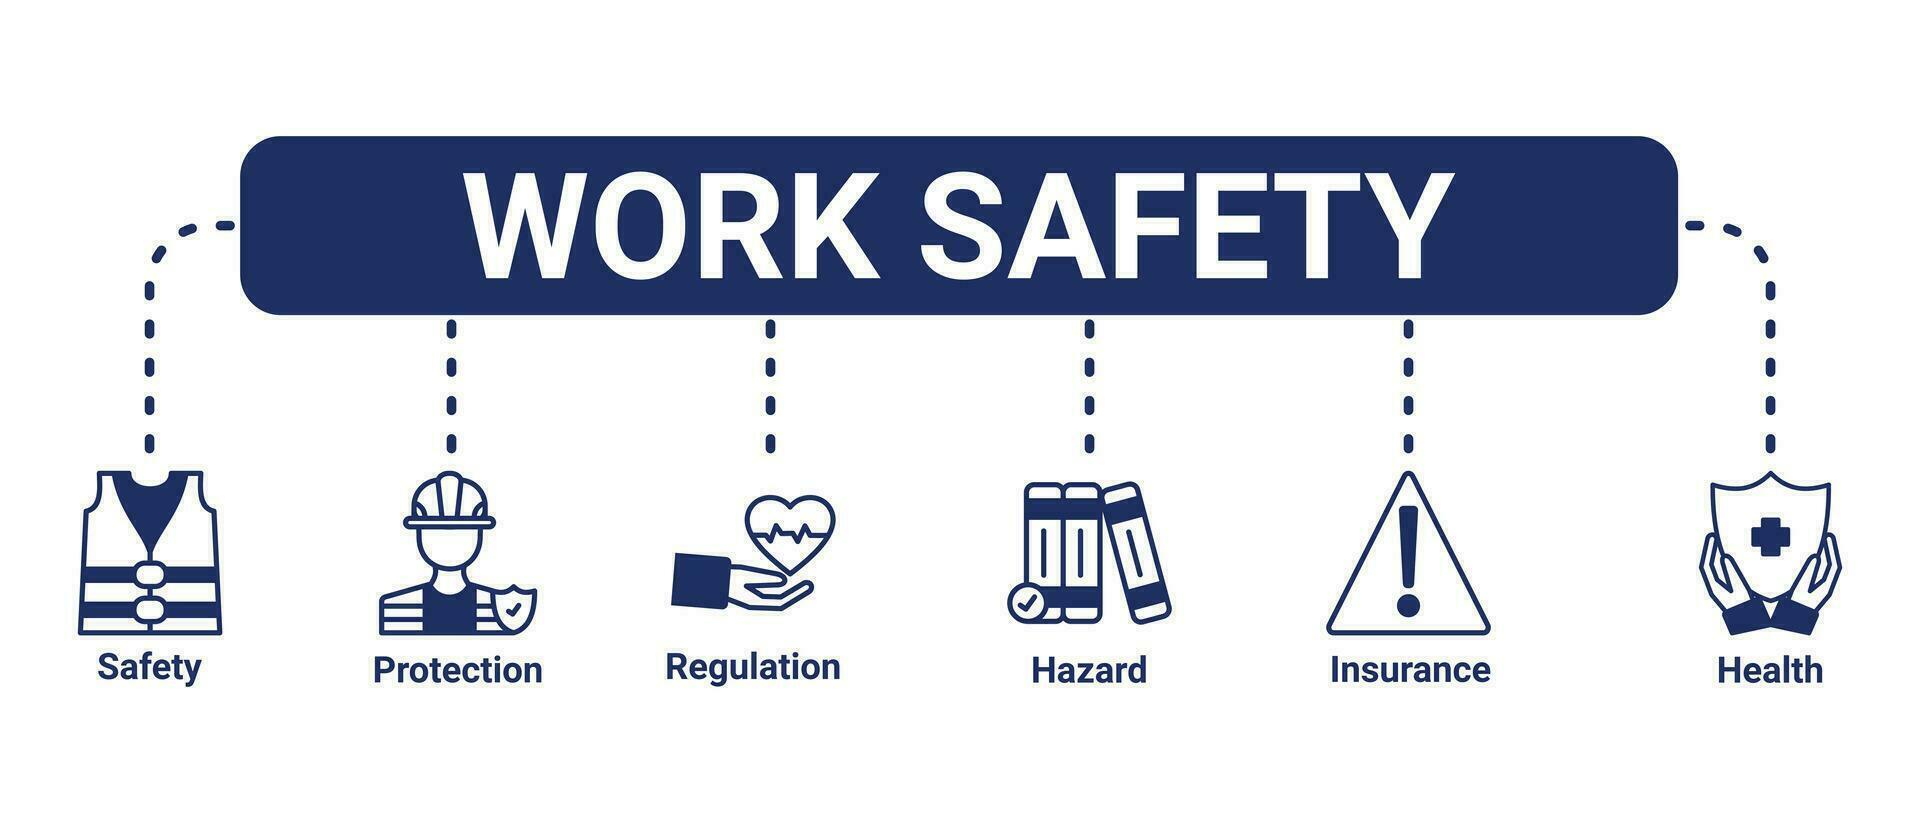 Work safety banner website icons vector illustration concept of occupational safety and health with an icons of safety first, protection, regulations, hazard, health, insurance on white background